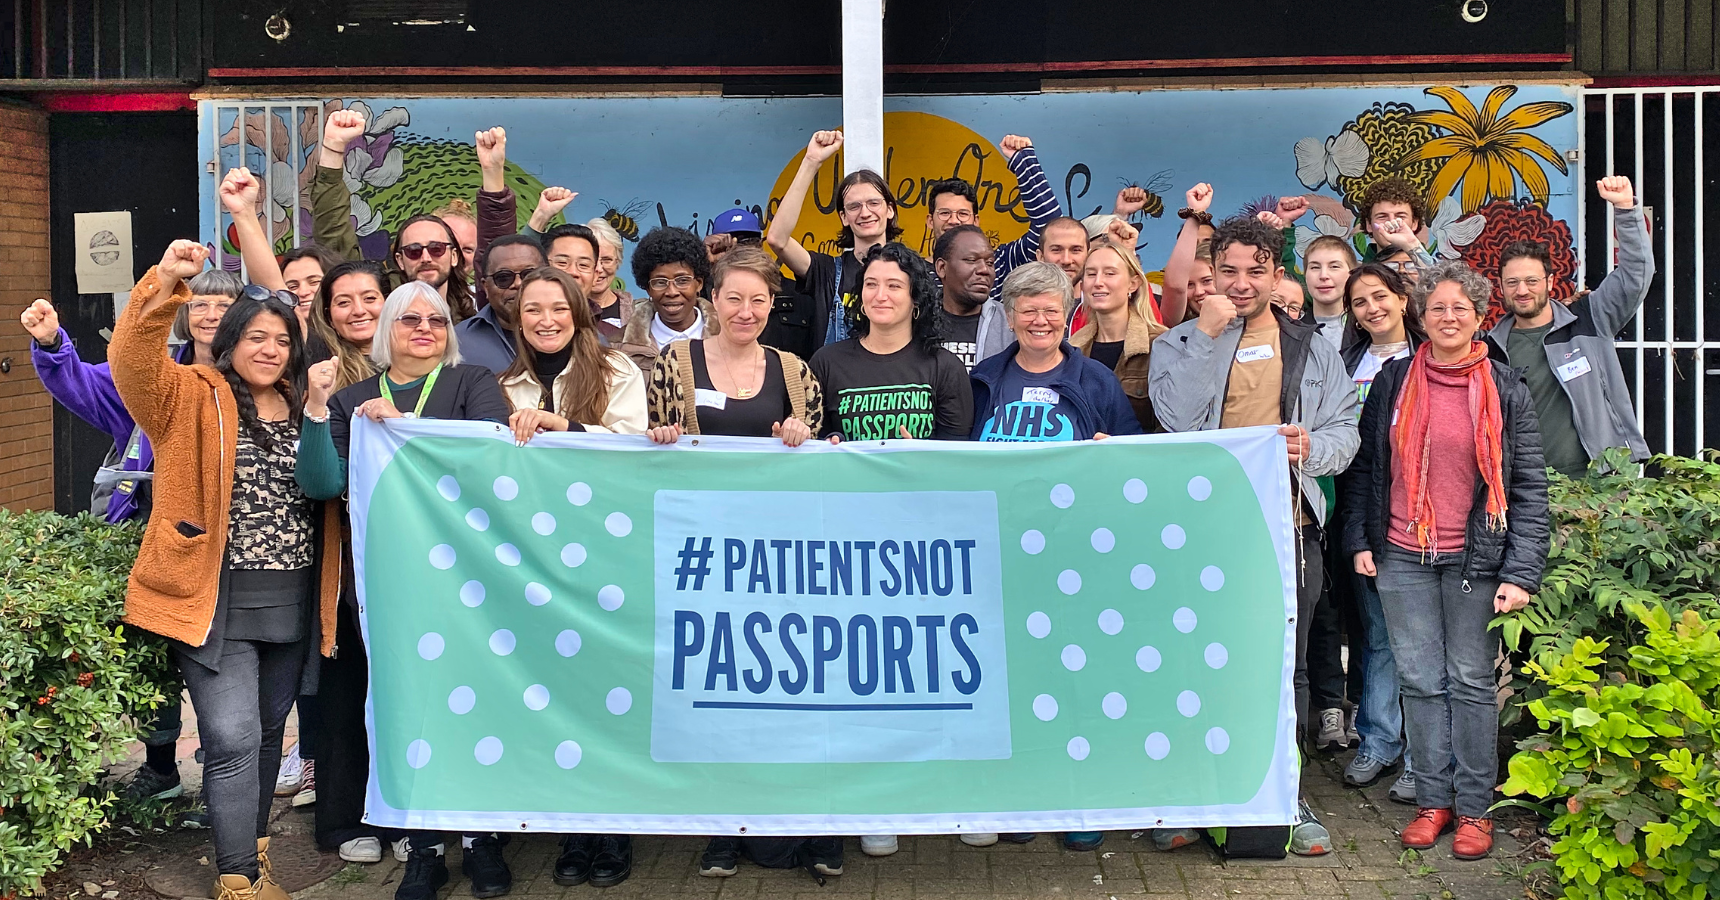 Patients not Passports New Joiners Meeting: January